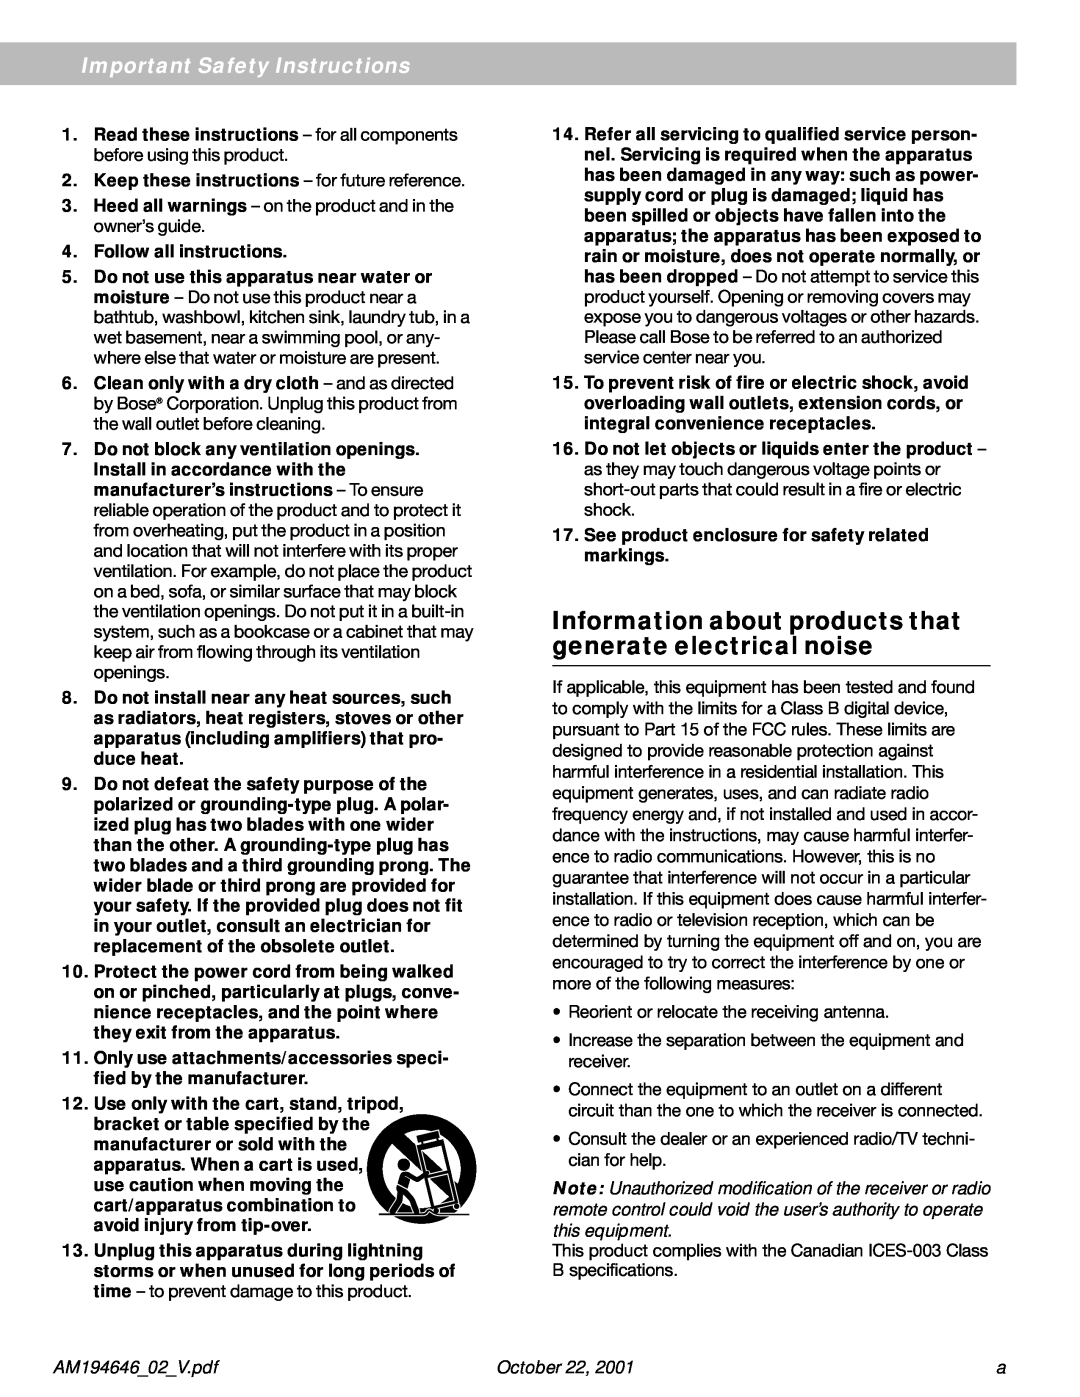 Bose 10 Series II manual Important Safety Instructions, October 